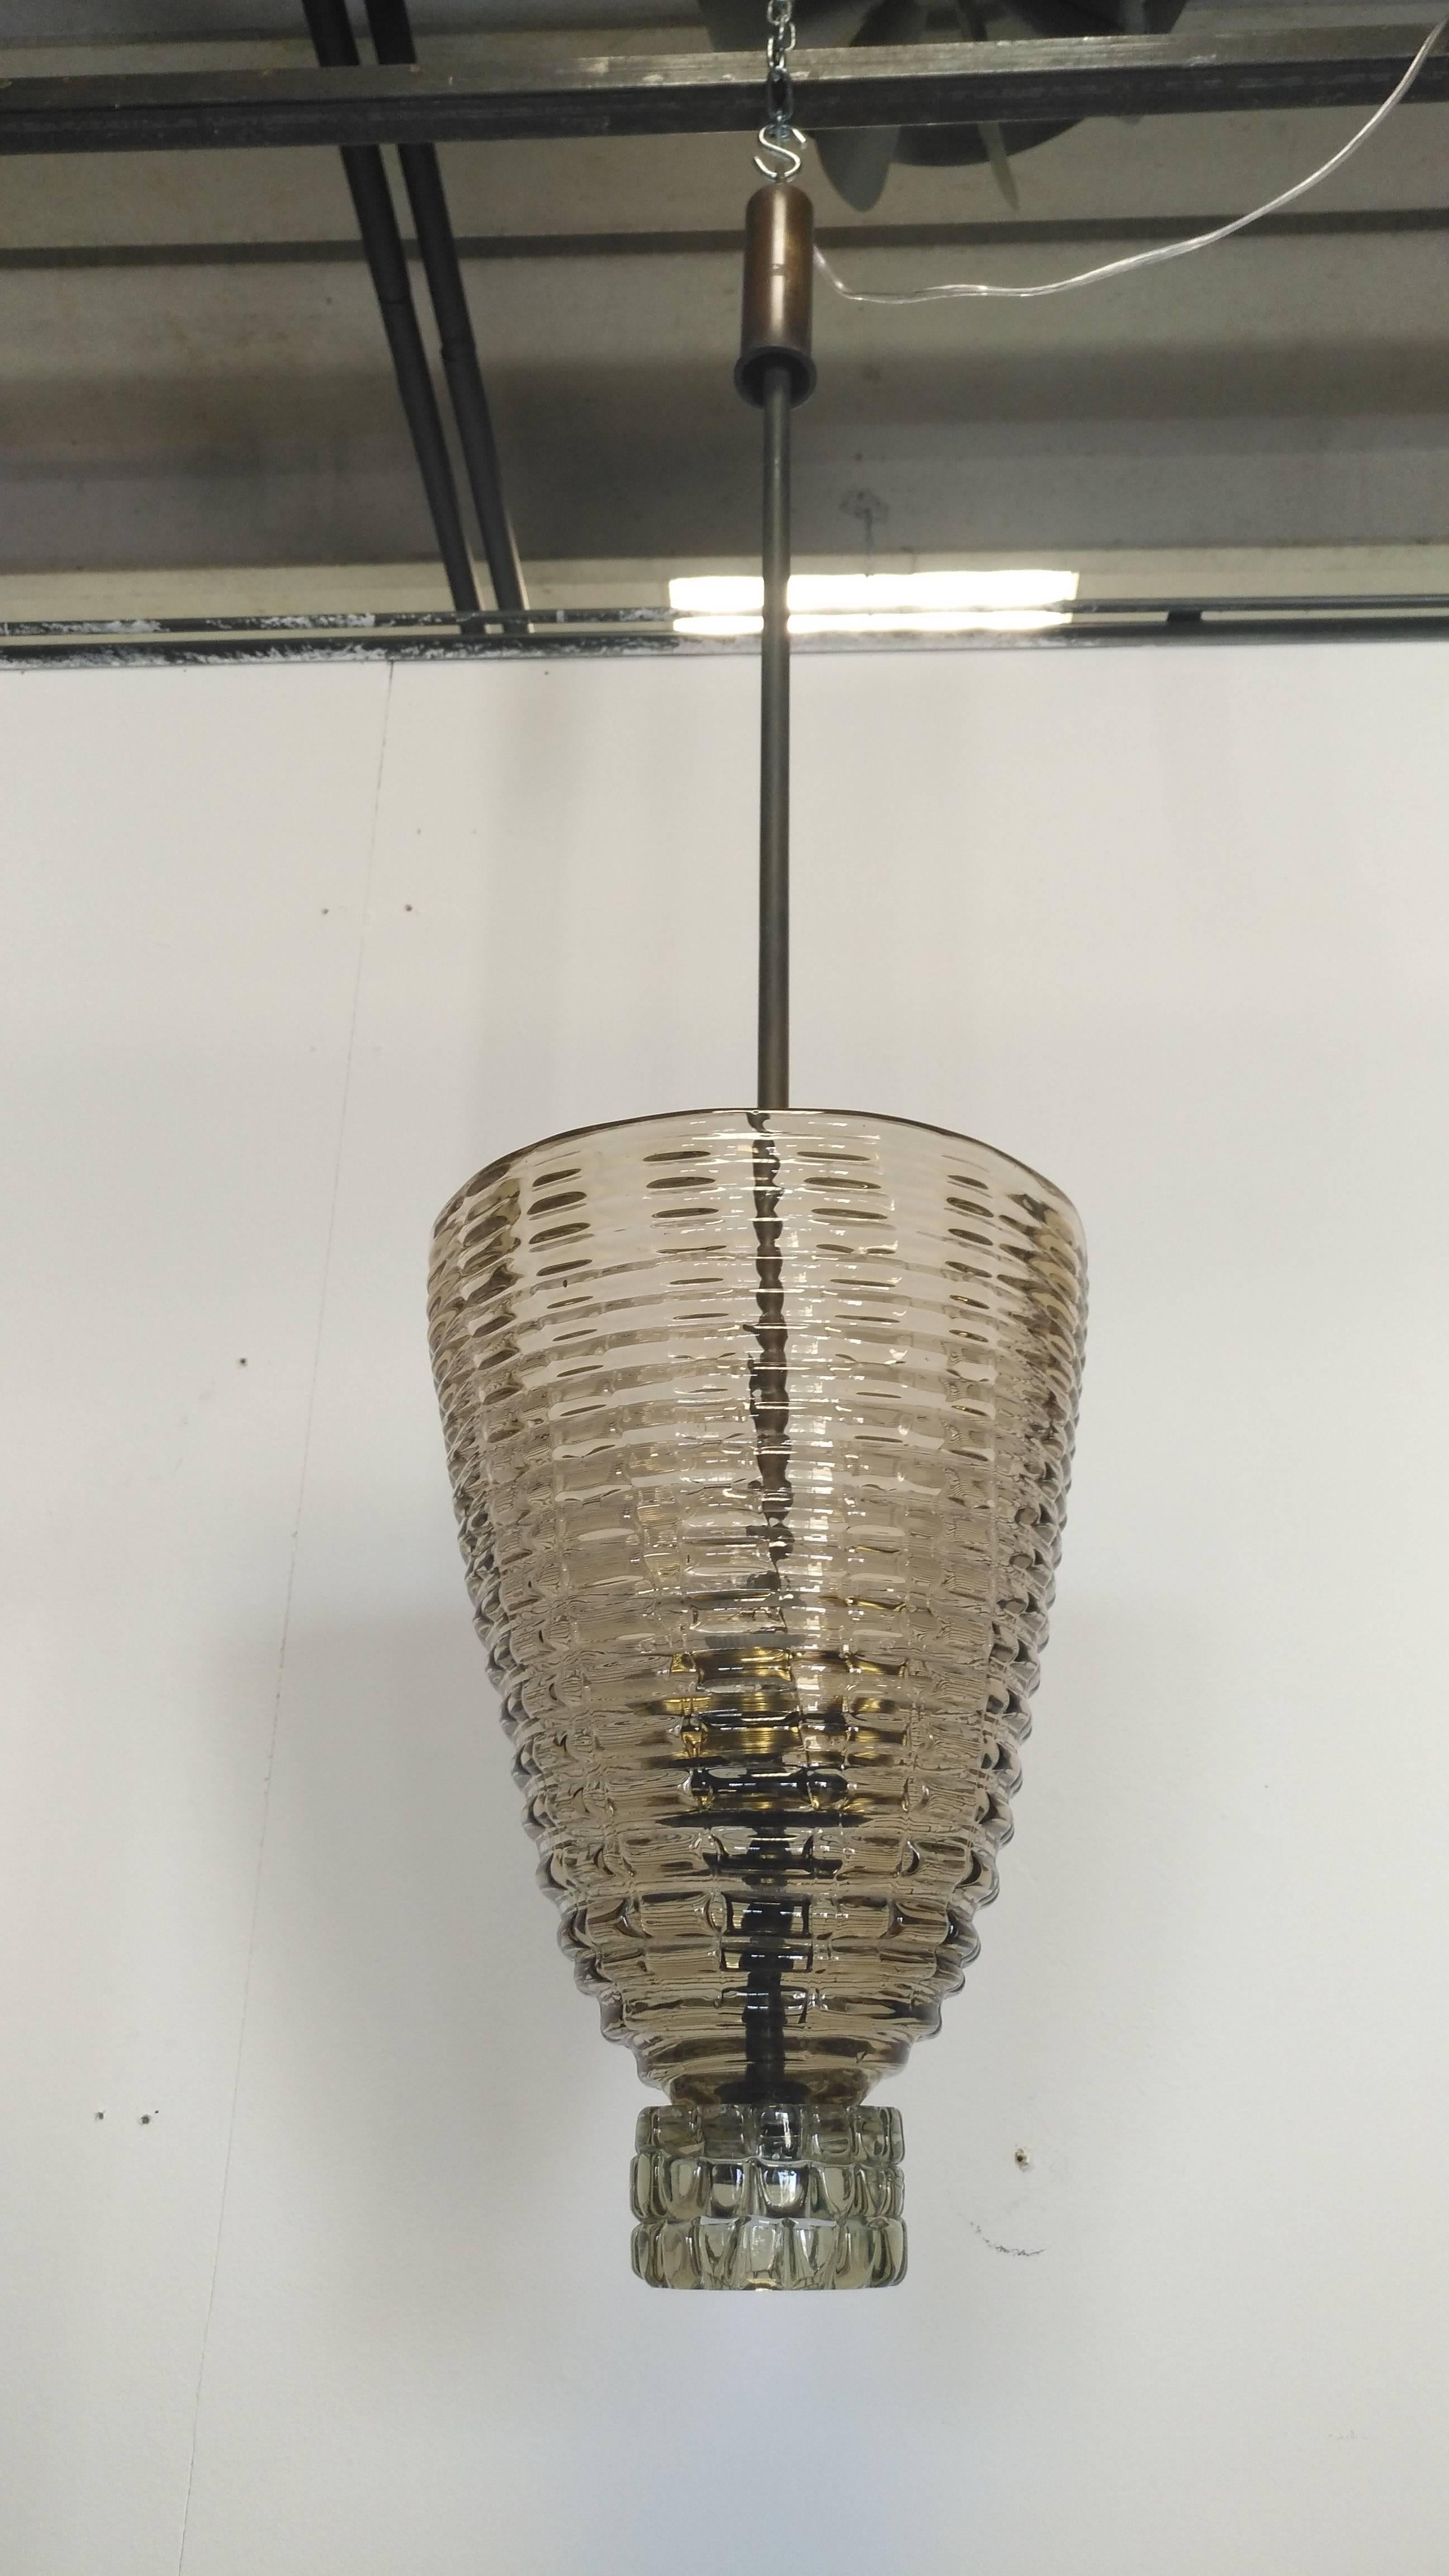 Beautiful chandelier with brass stem and a large cup iridescent amber glass as diffuser, final glass with brass custom screw with engraved Venini signature
Original in all parts from 1940, designed by Carlo Scarpa and manufactured by Venini
The